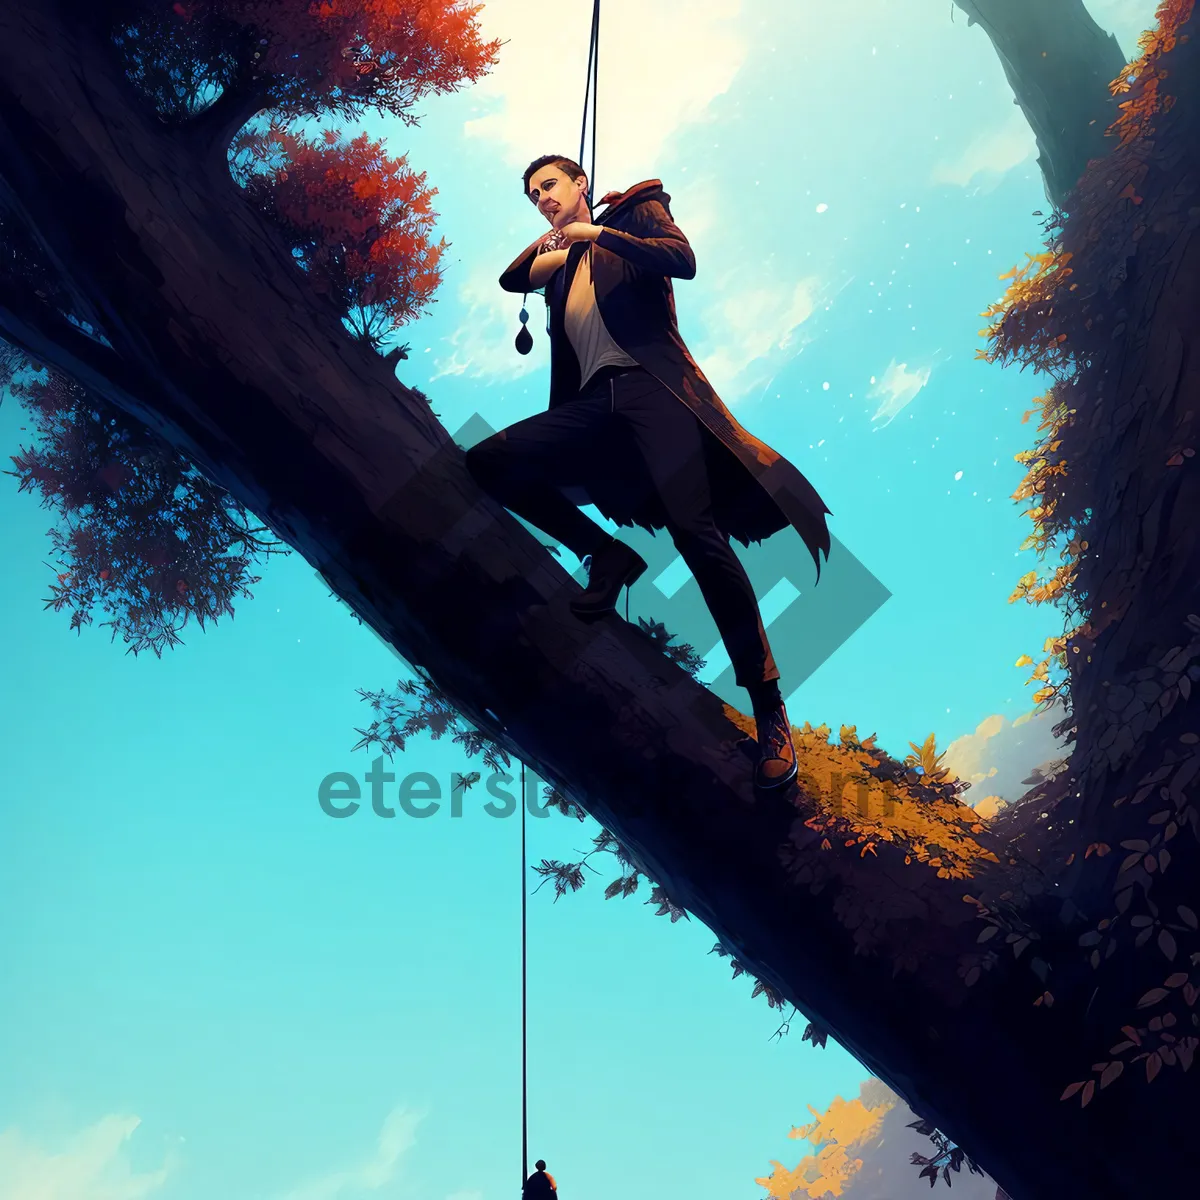 Picture of Sunset Swing: Active Man Enjoying Sky-High Jump